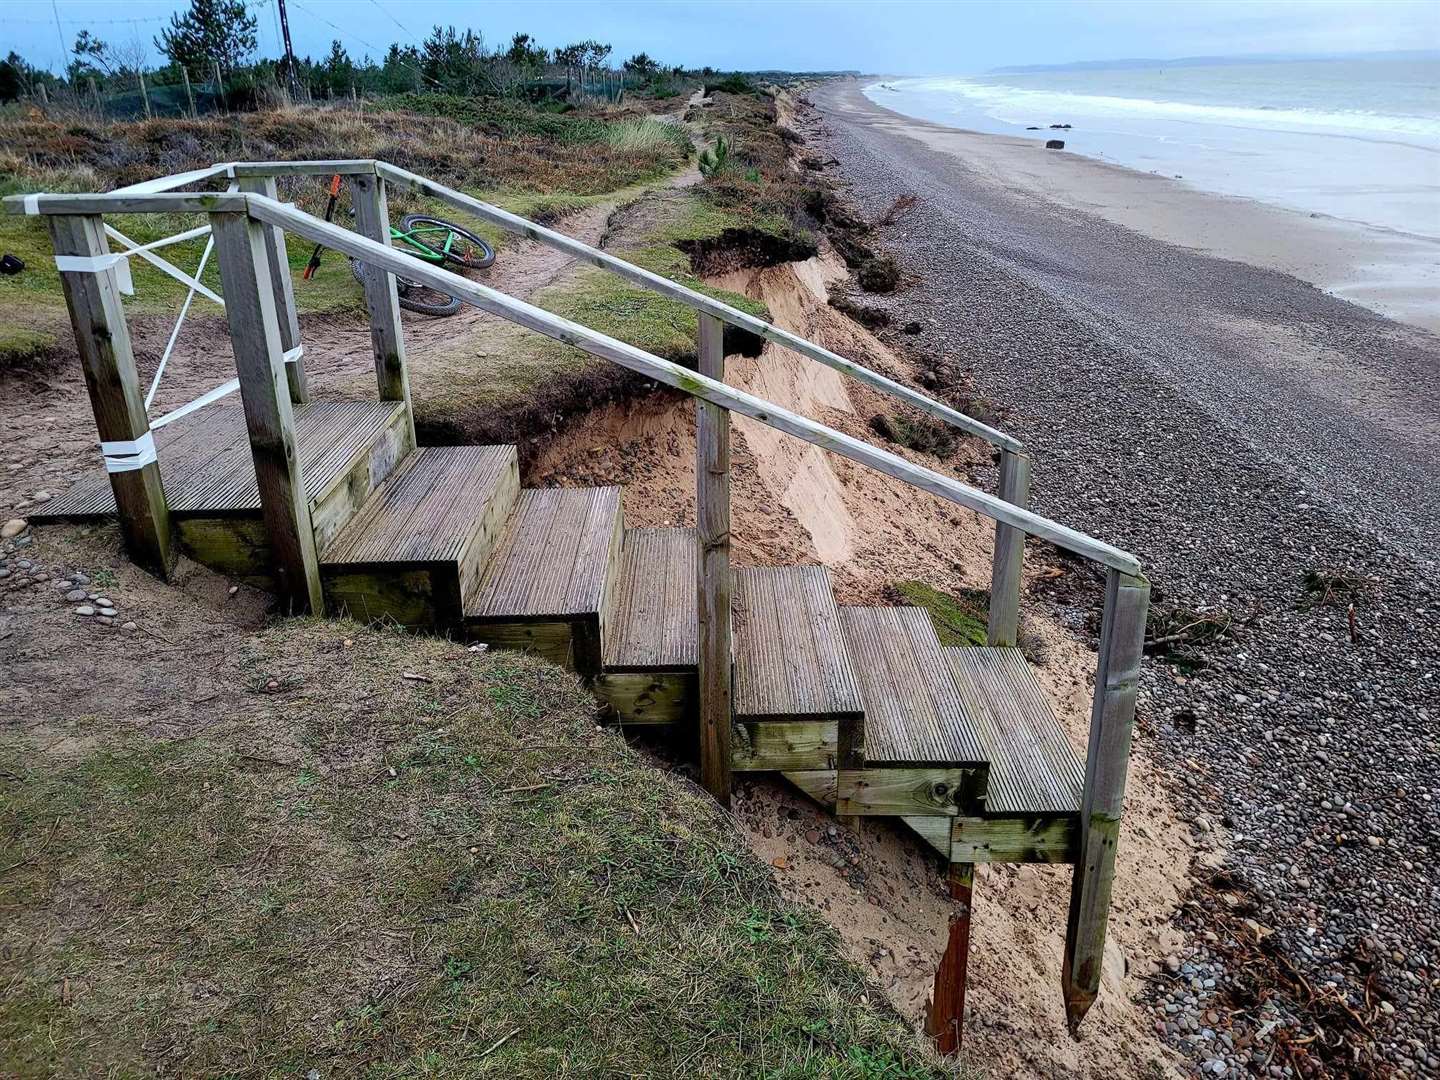 39 Engineer Regiment recently removed what remained of steps between the camp perimeter and Roseisle Wood after their lower half washed away.